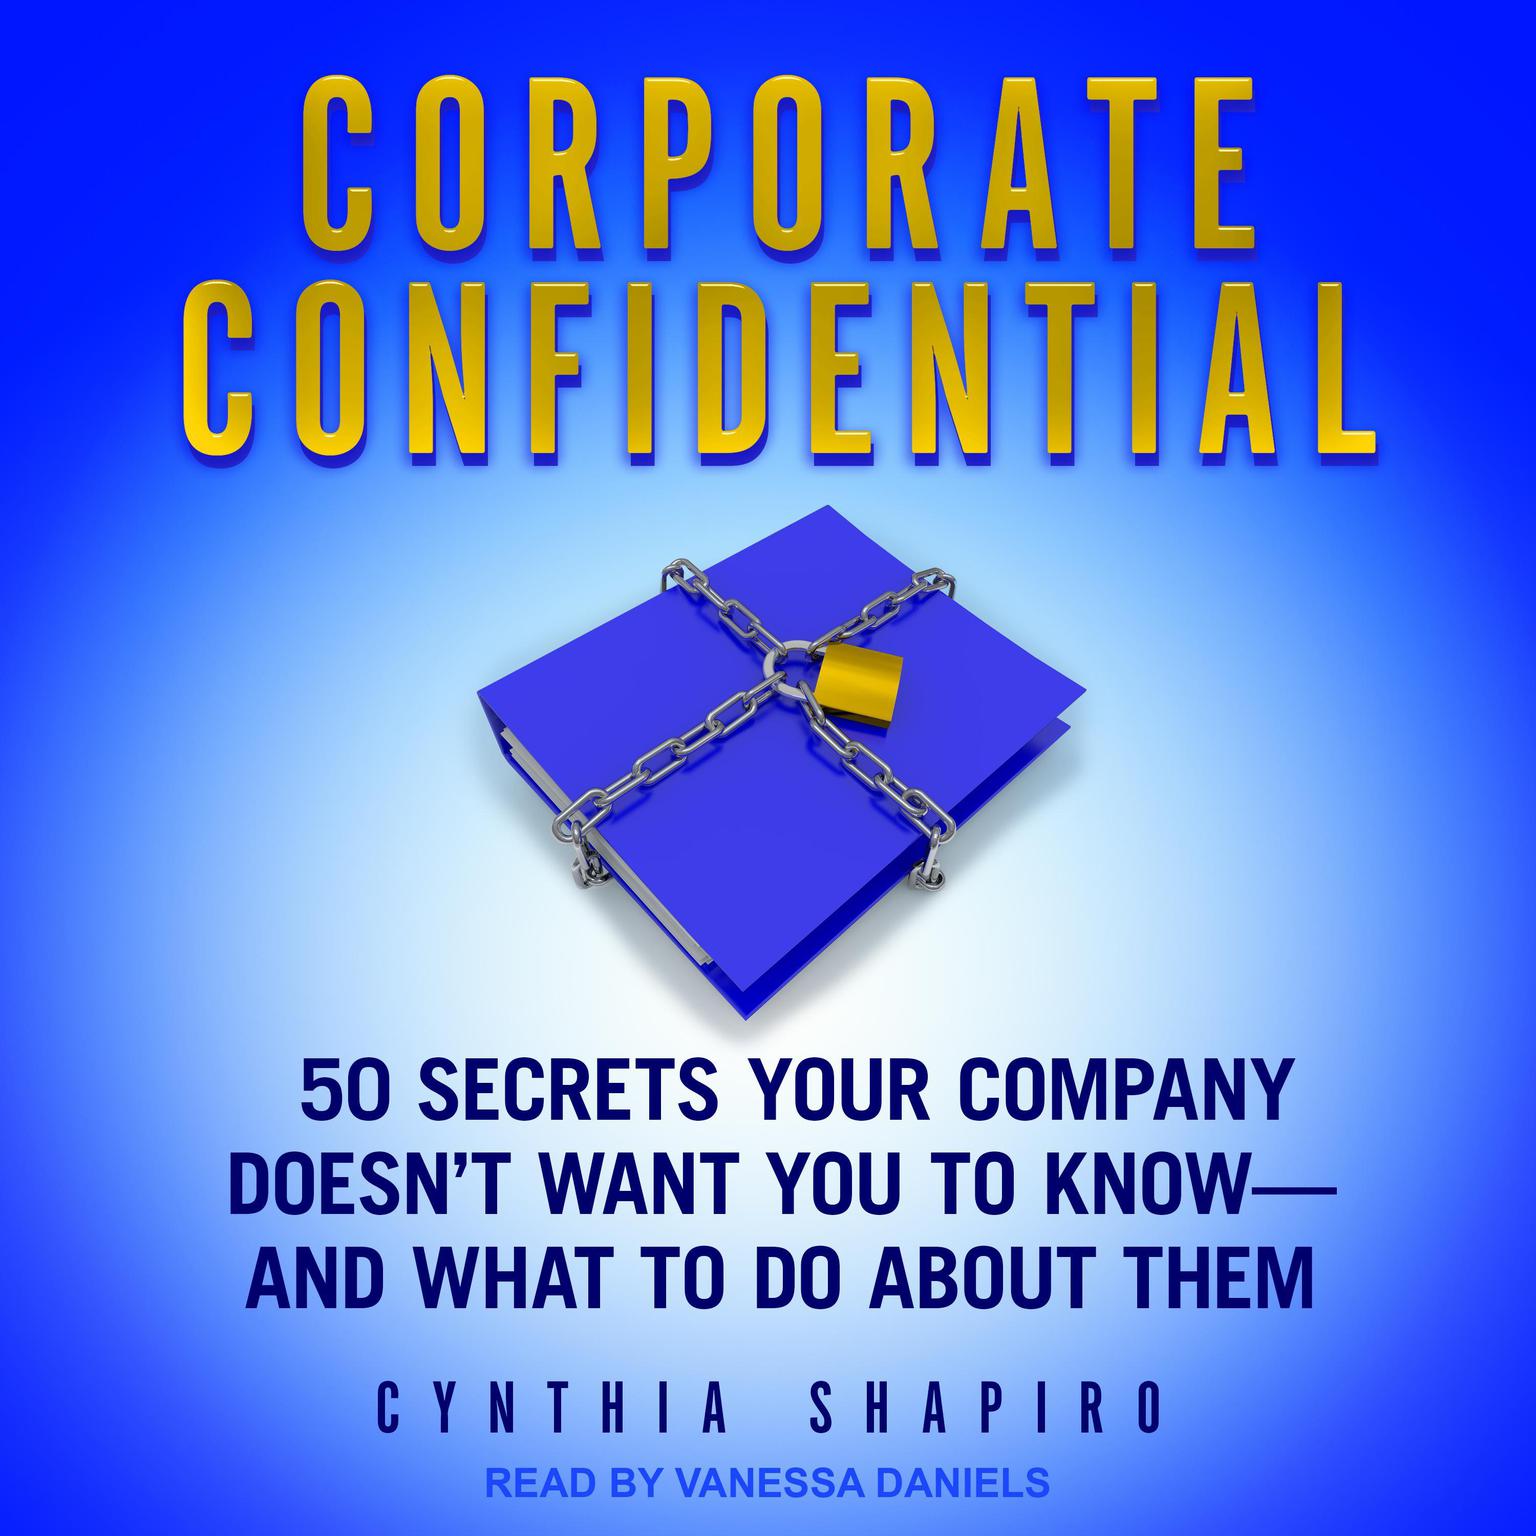 Corporate Confidential: 50 Secrets Your Company Doesn’t Want You to Know - and What to Do About Them Audiobook, by Cynthia Shapiro